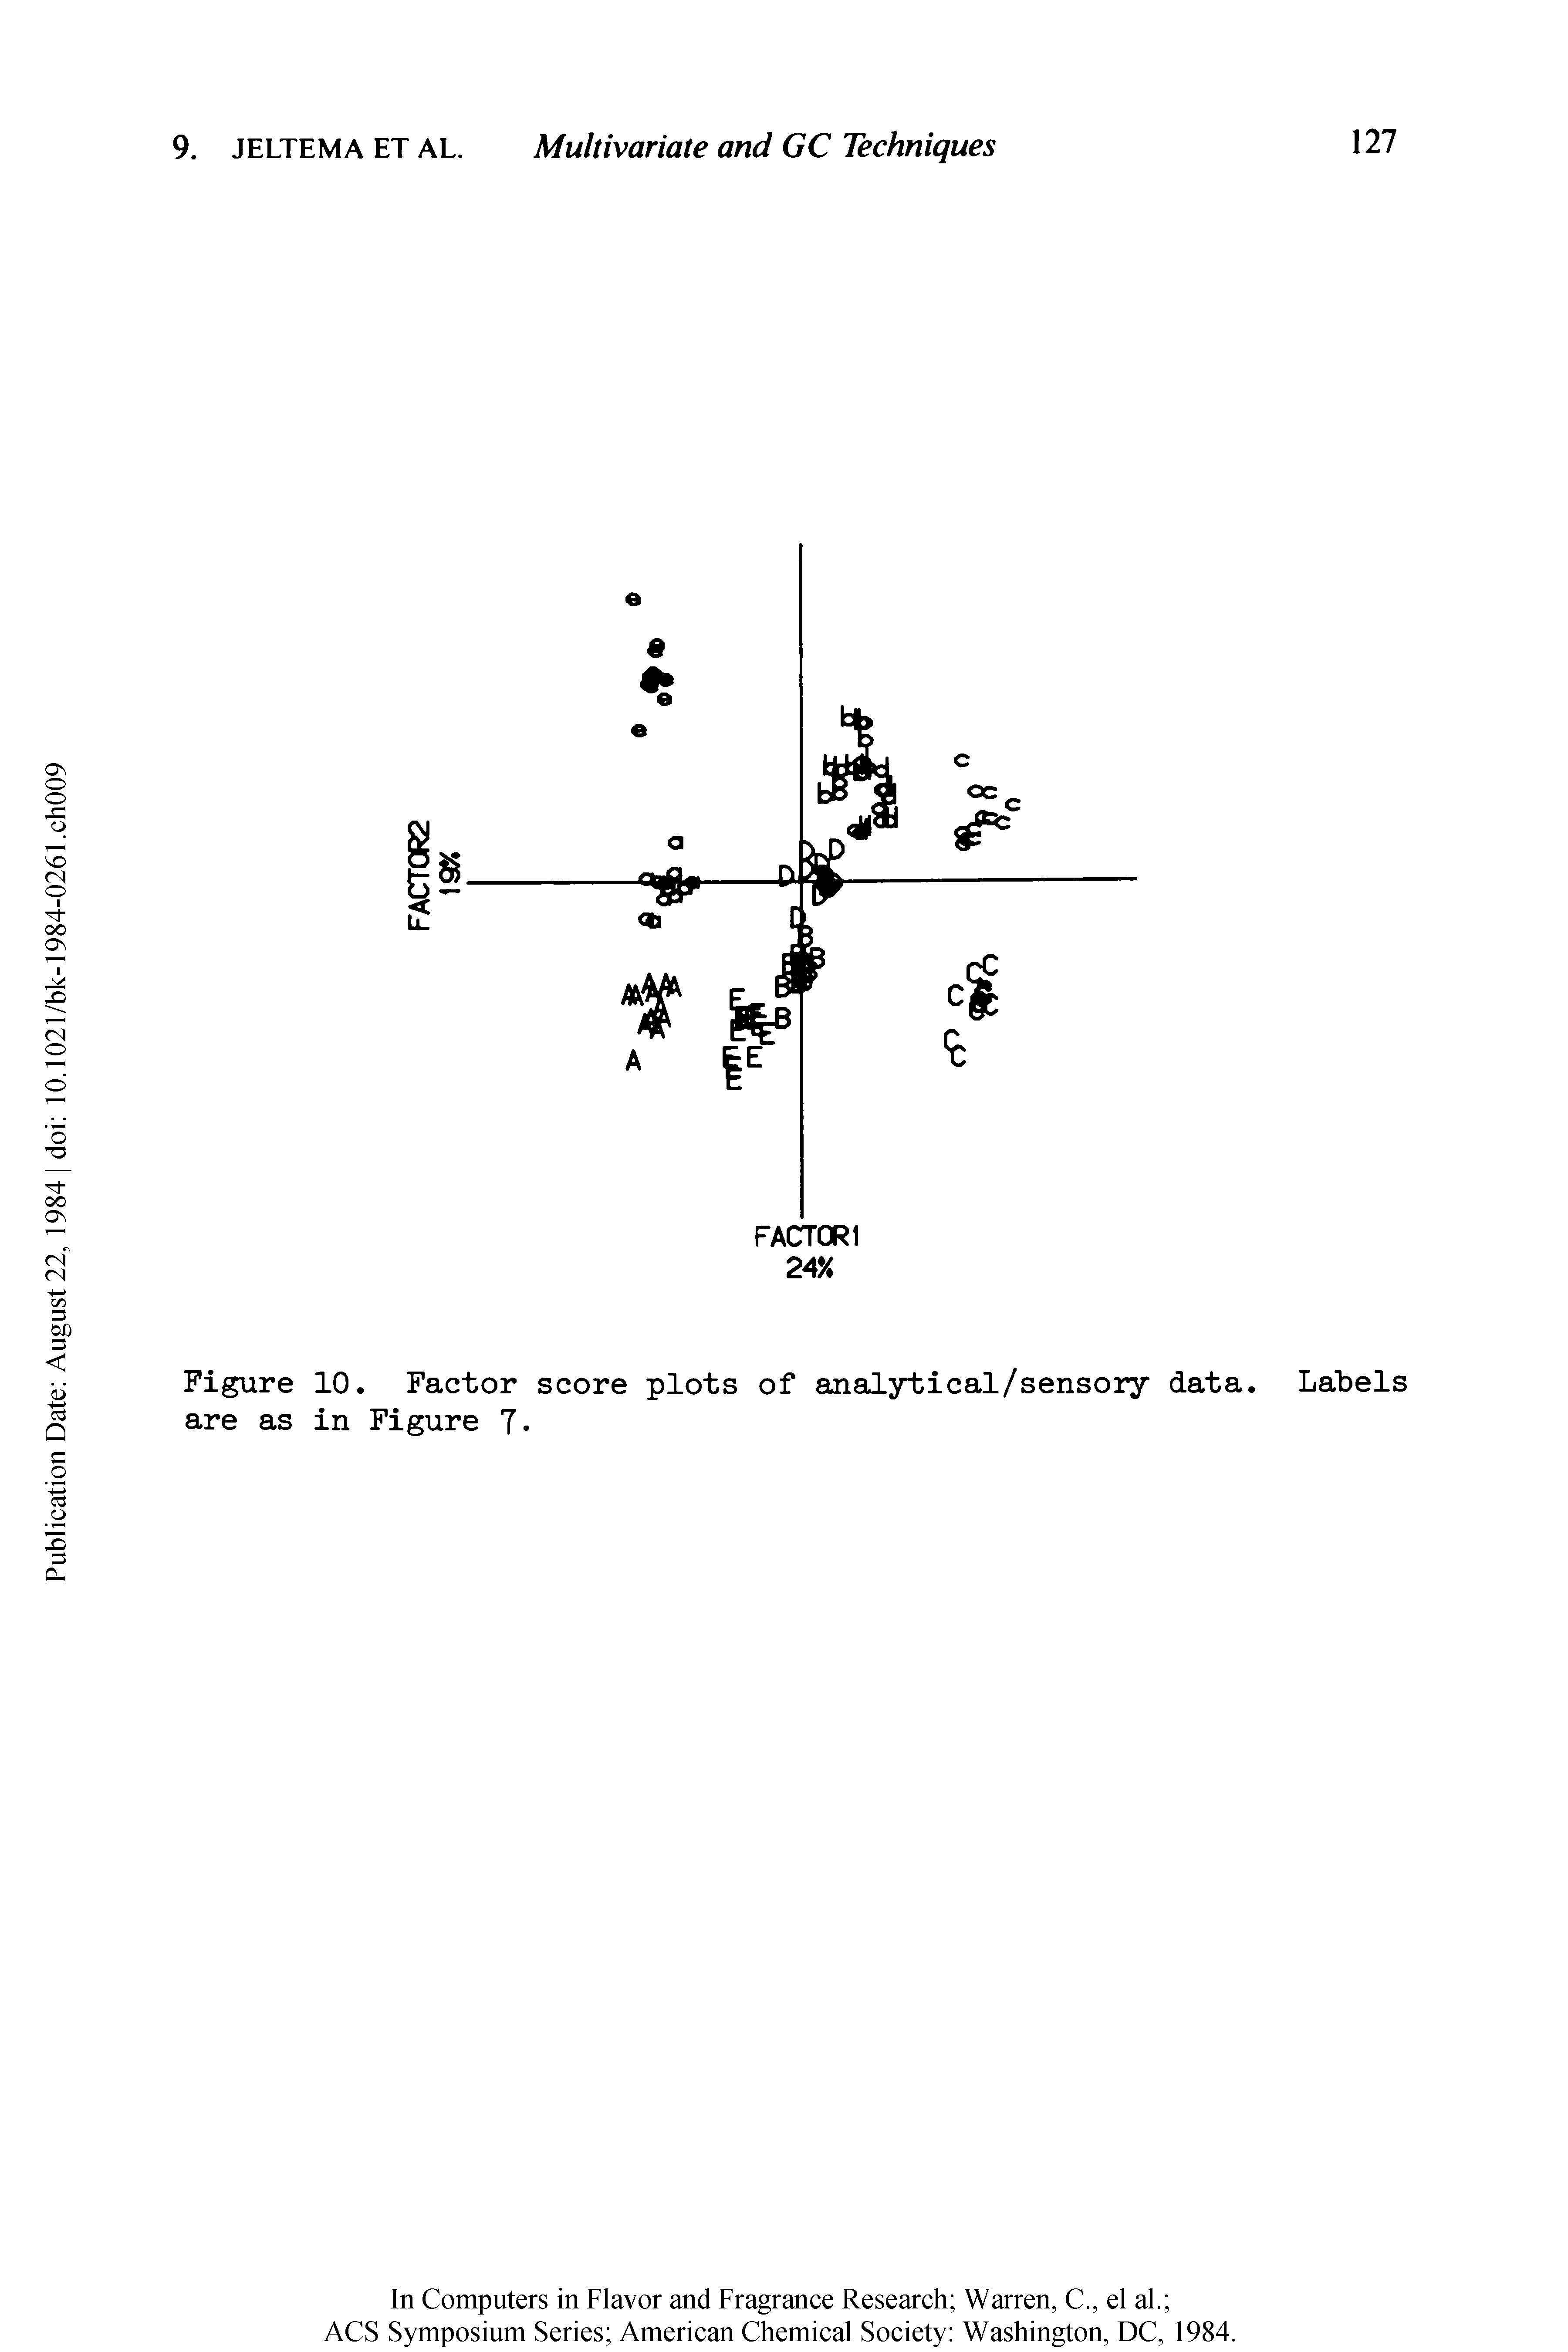 Figure 10. Factor score plots of analytical/sensory data. Labels are as in Figure T-...